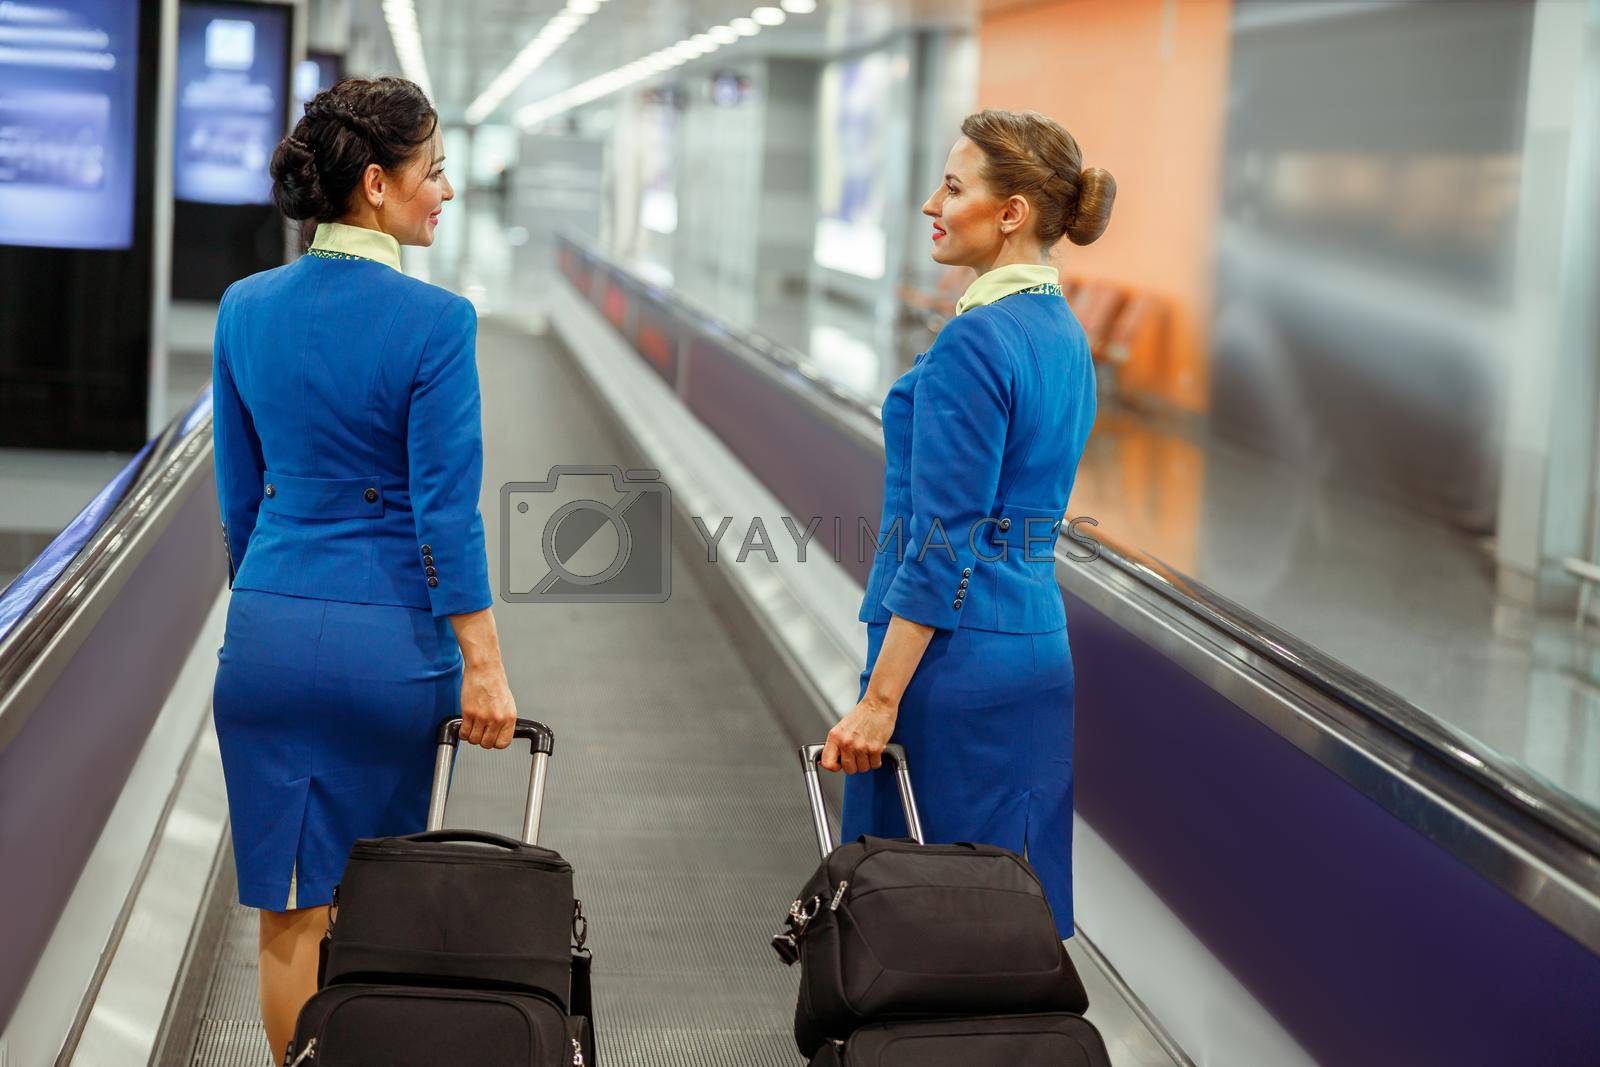 Cheerful female flight attendants with trolley luggage bags walking down airport terminal